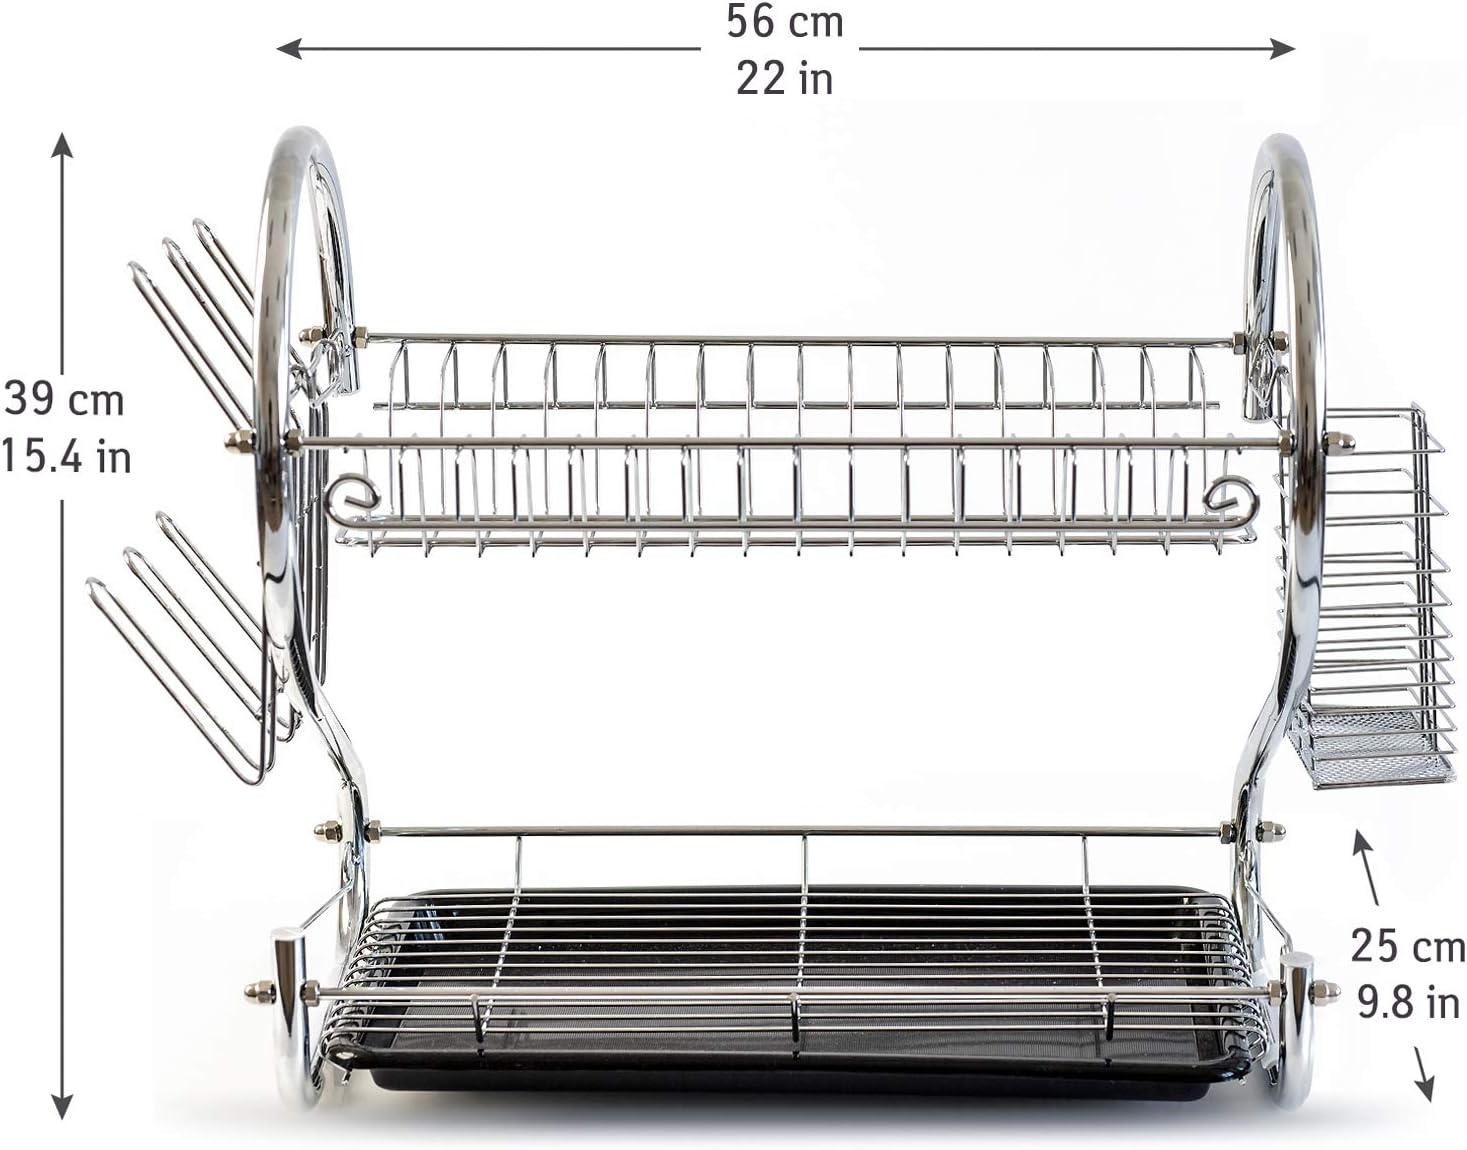 Tatkraft Helga 2-Tier Dish Drying Rack, Drainer with Drainboard for Kitchen Counter, Mug and Utensil Holder, Chrome-Plated, Easy Assembly